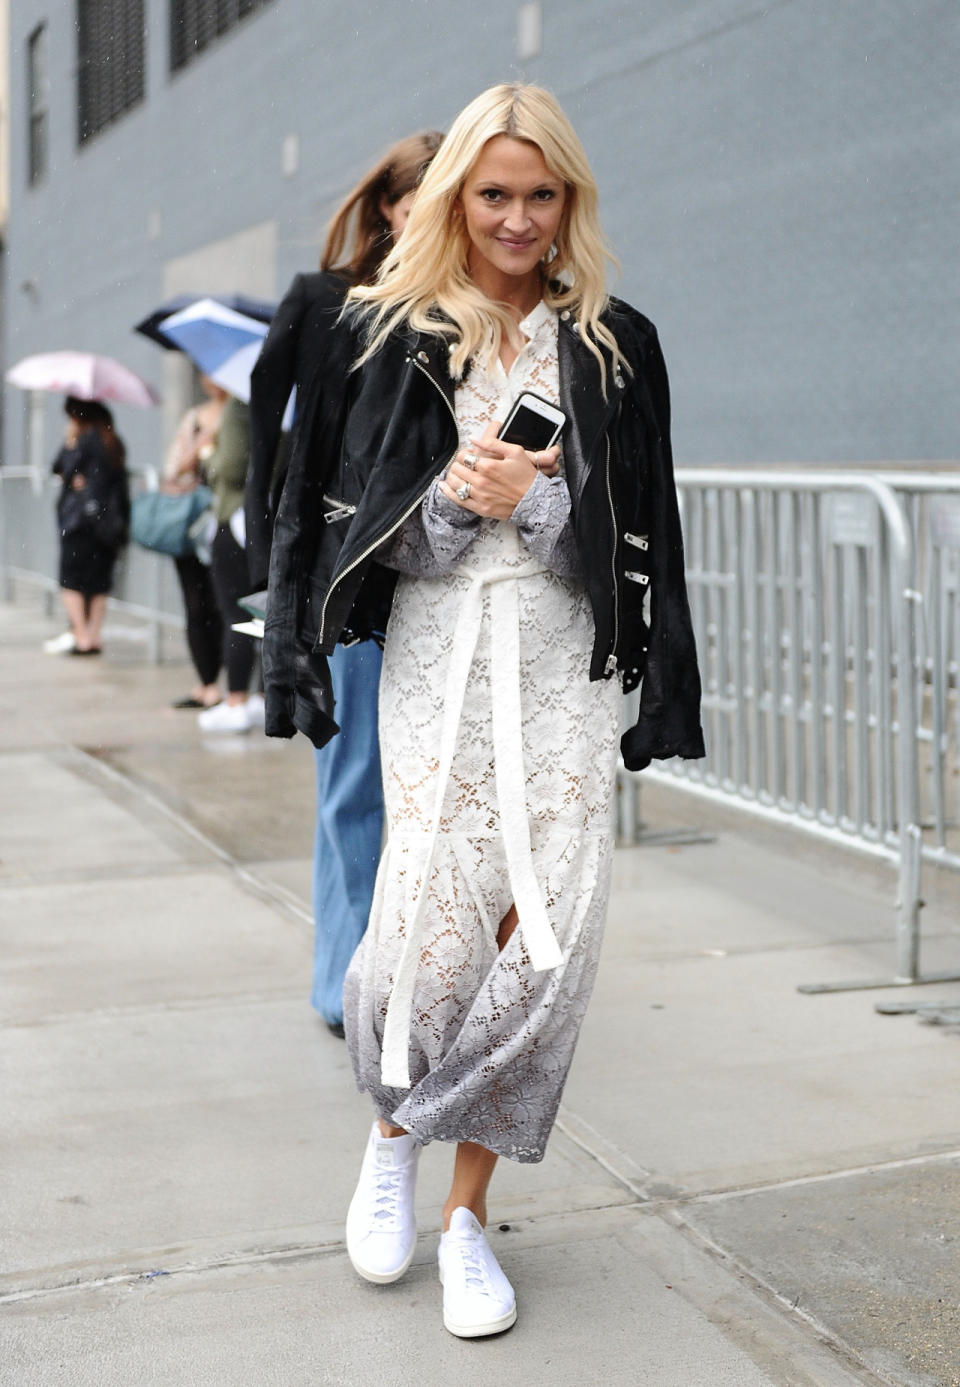 Zanna Roberts Rassi in a white dress and leather jacket at New York Fashion Week.